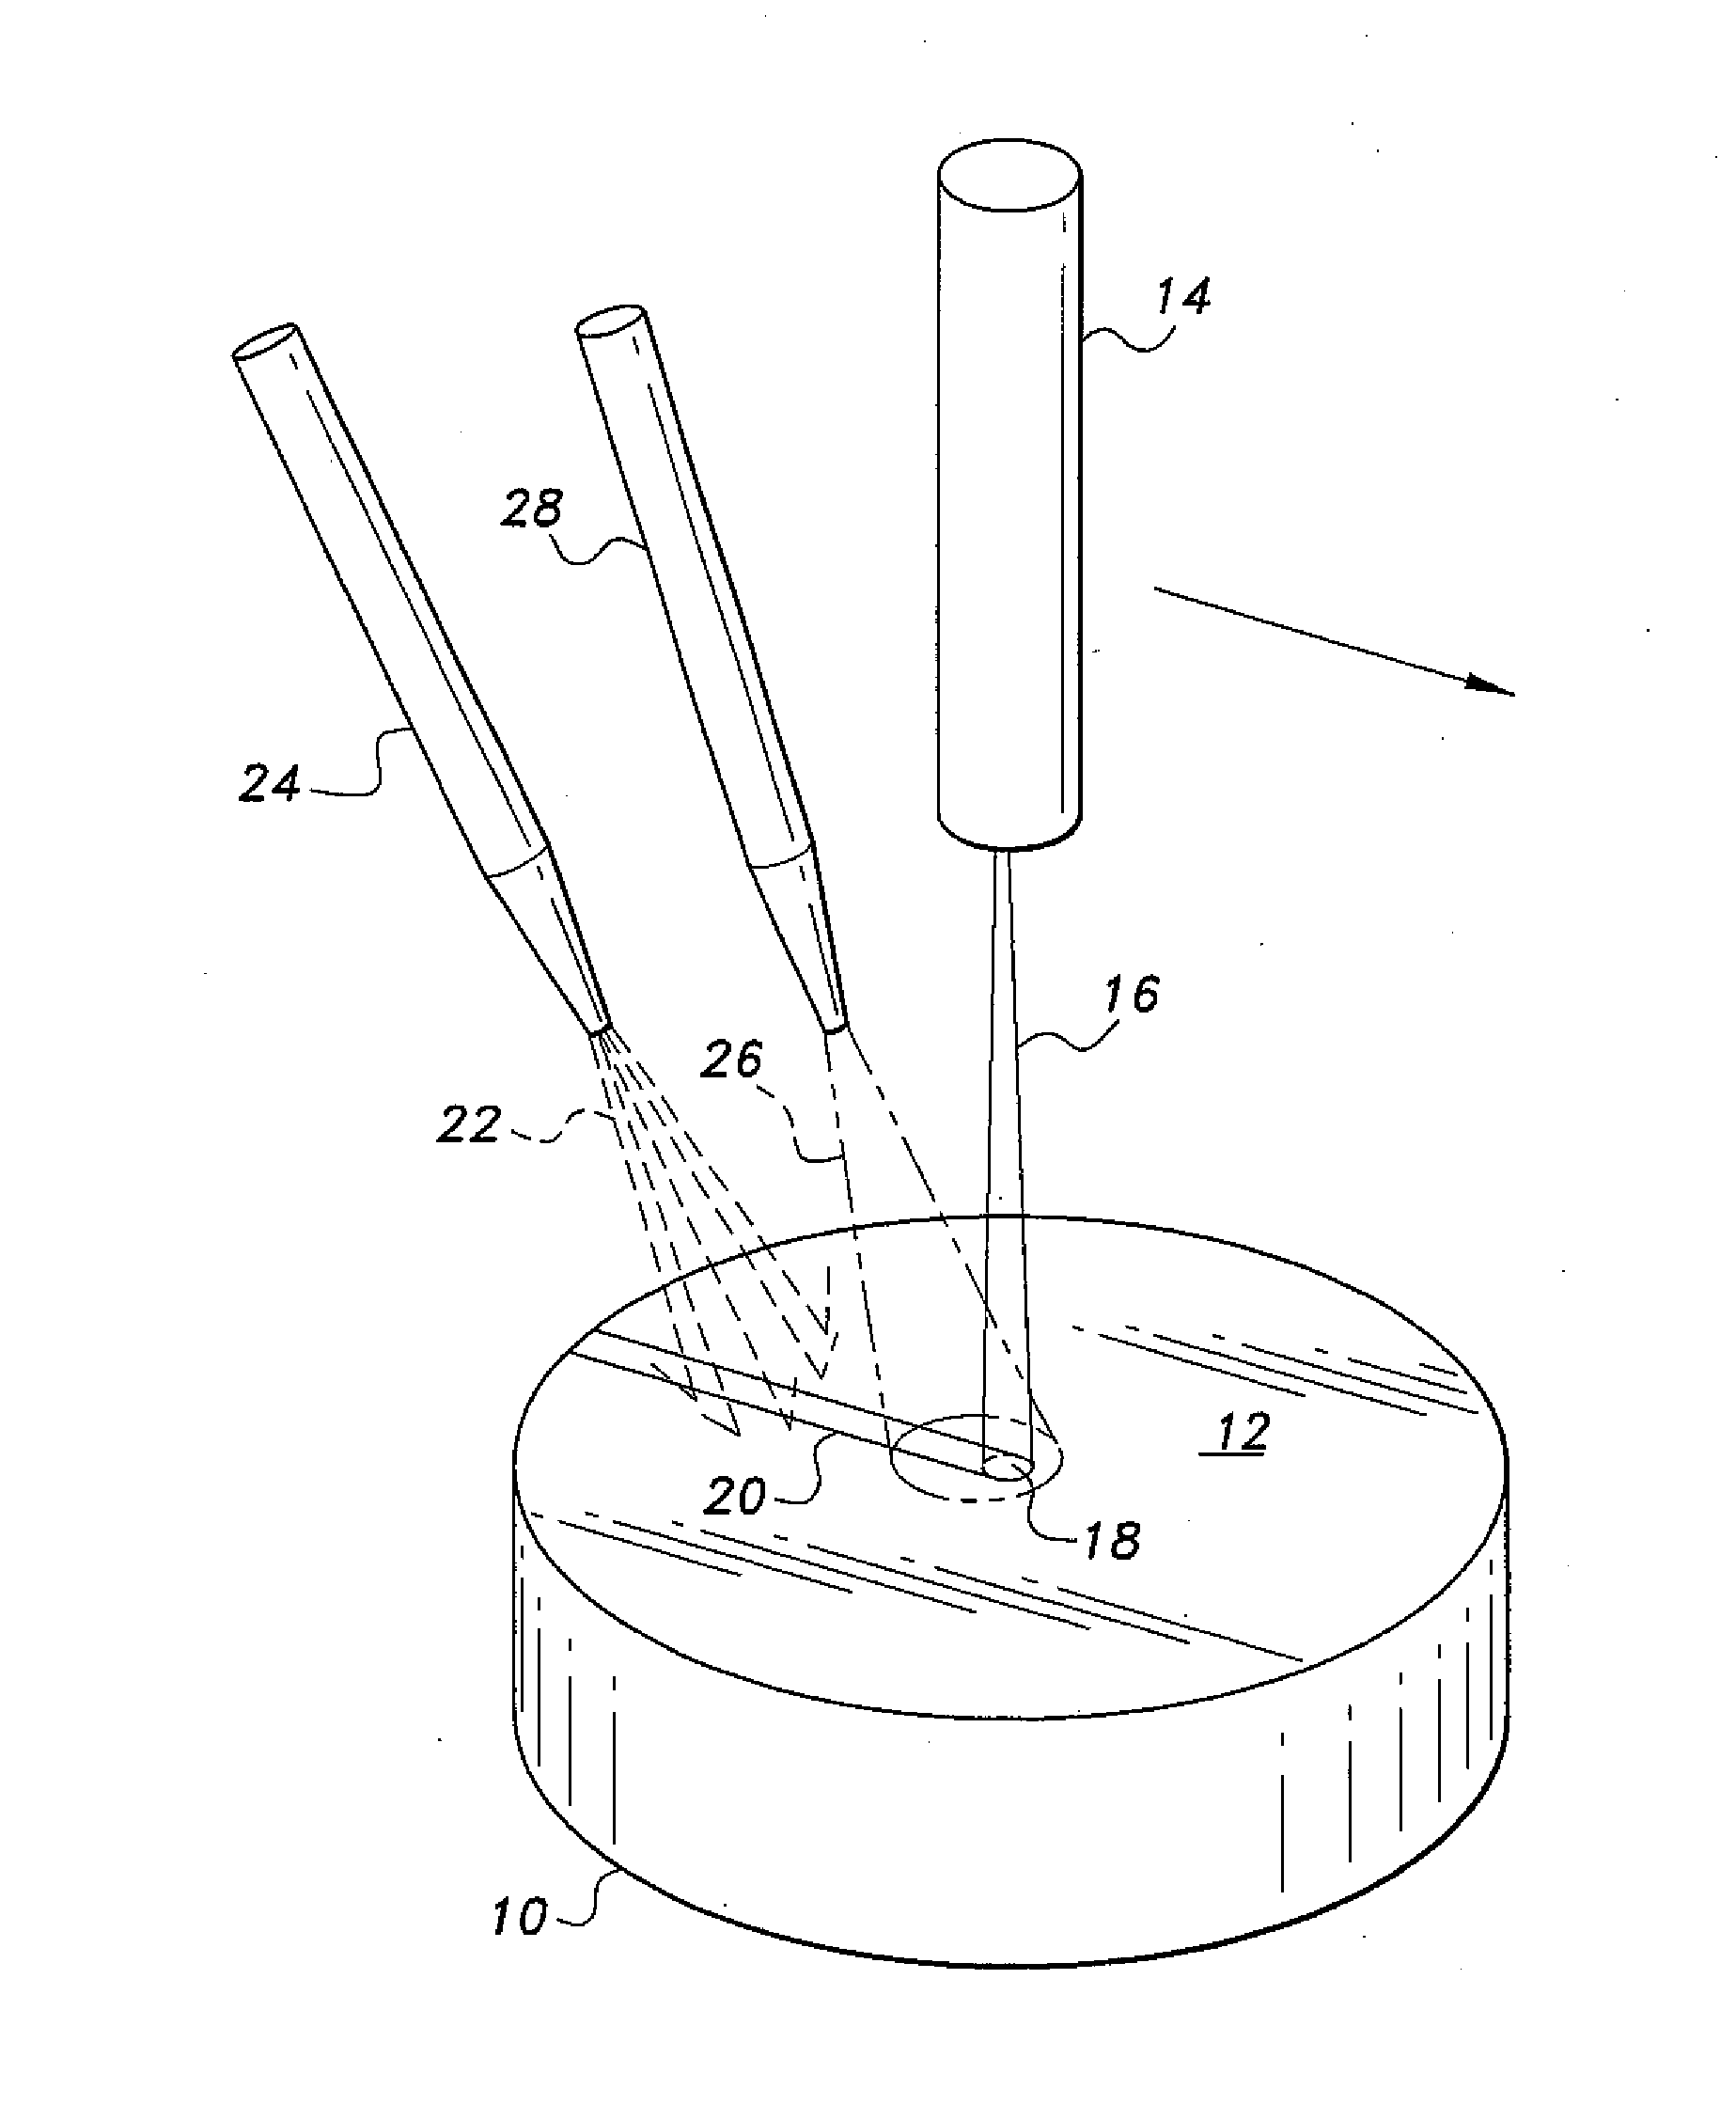 Method of increasing the hardness of wurtzite crystalline materials